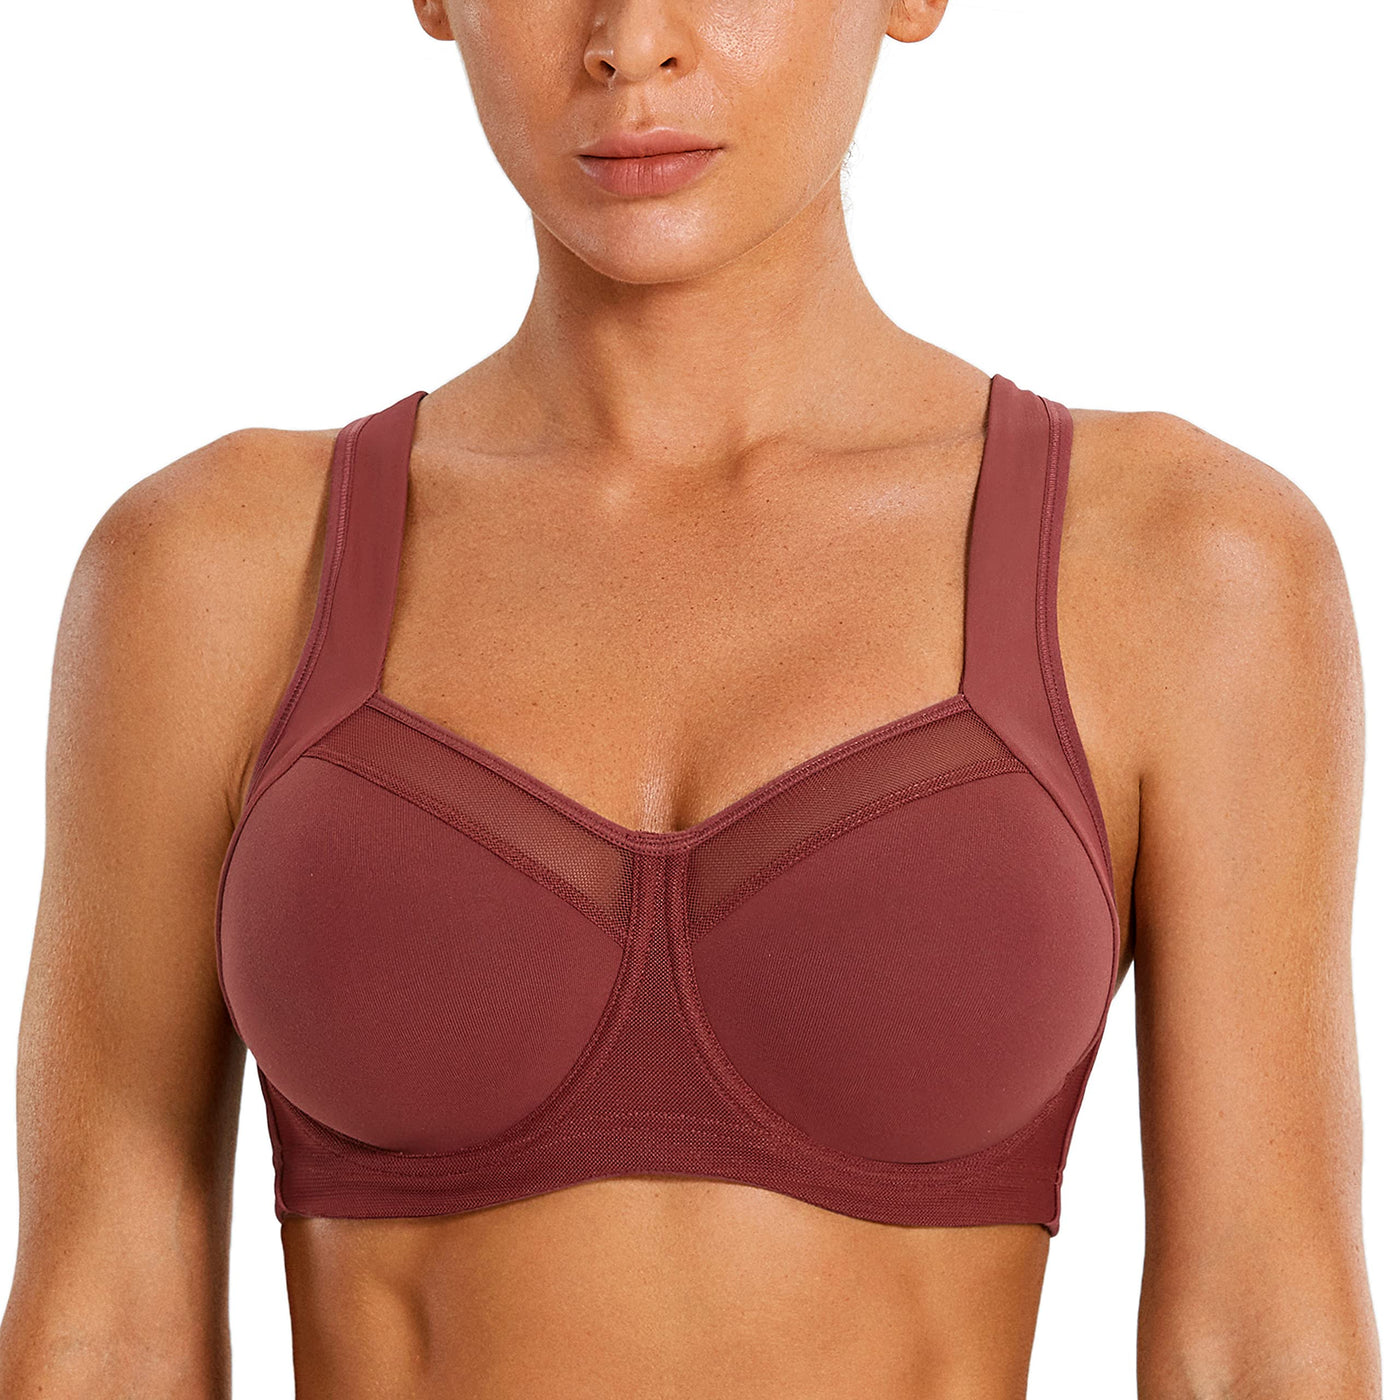 SYROKAN High Impact Sports Bras for Women Underwire High Support